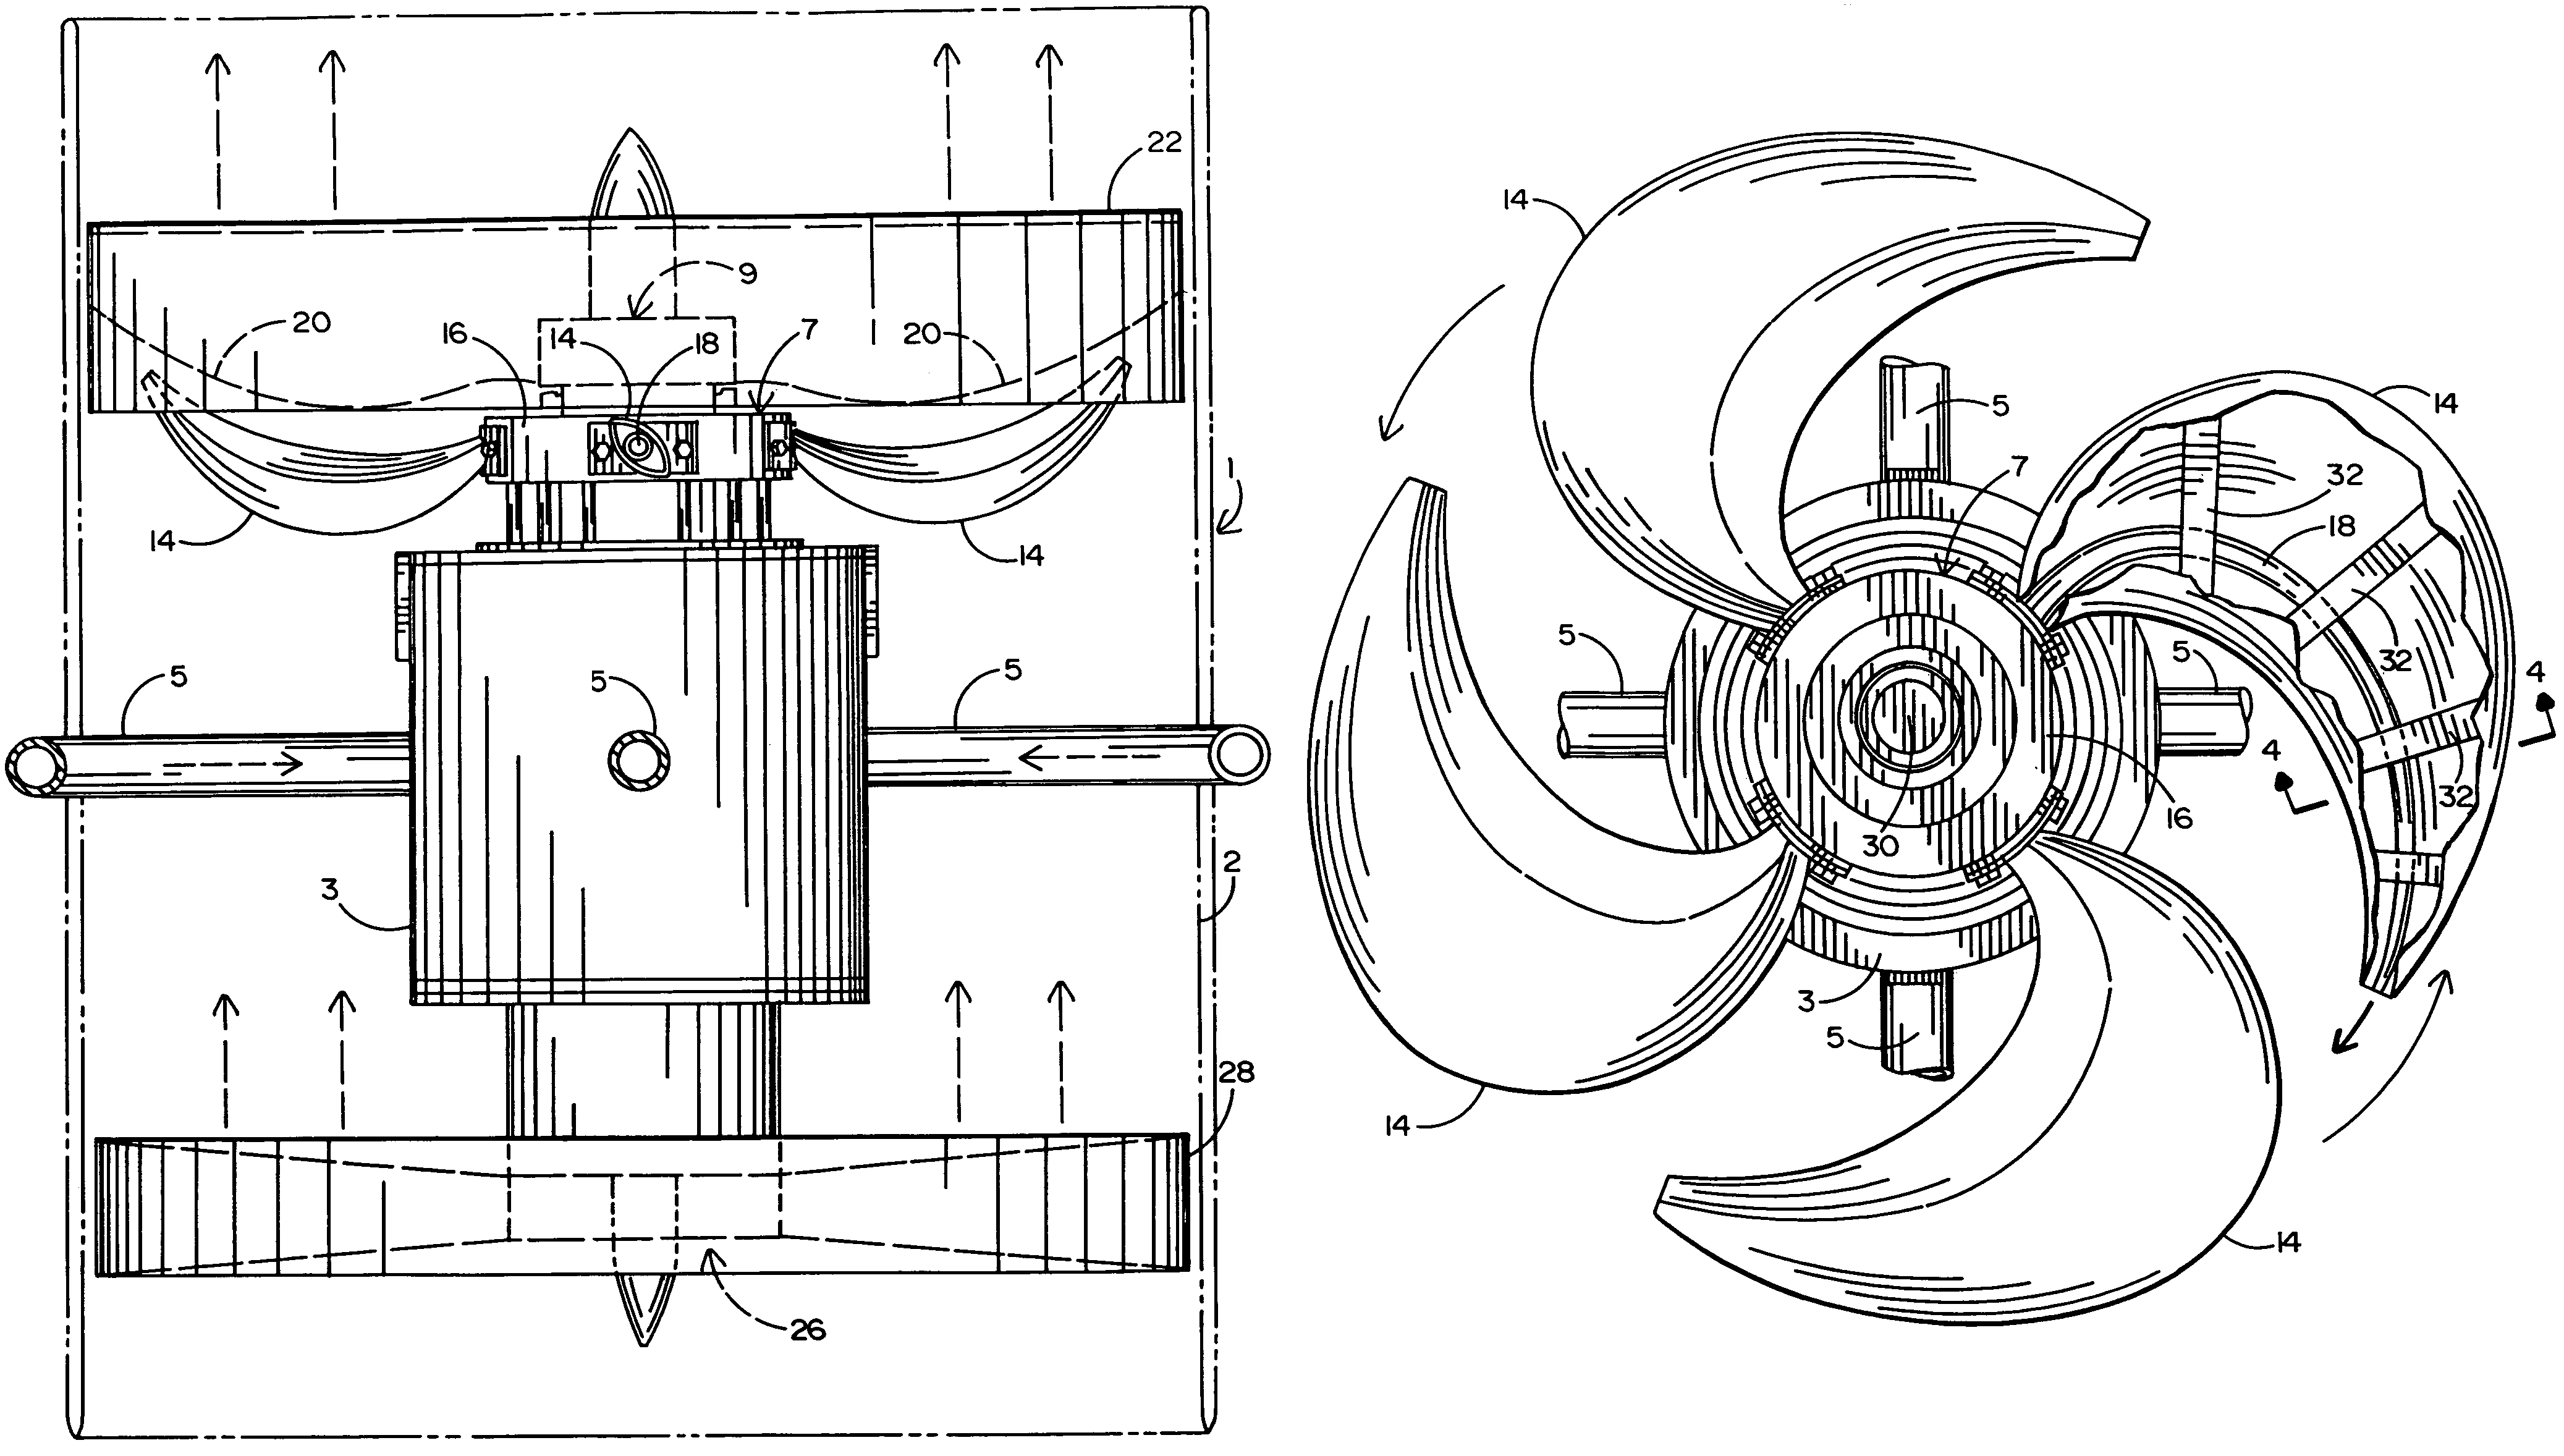 Multi-stage fluid power turbine for a fire extinguisher